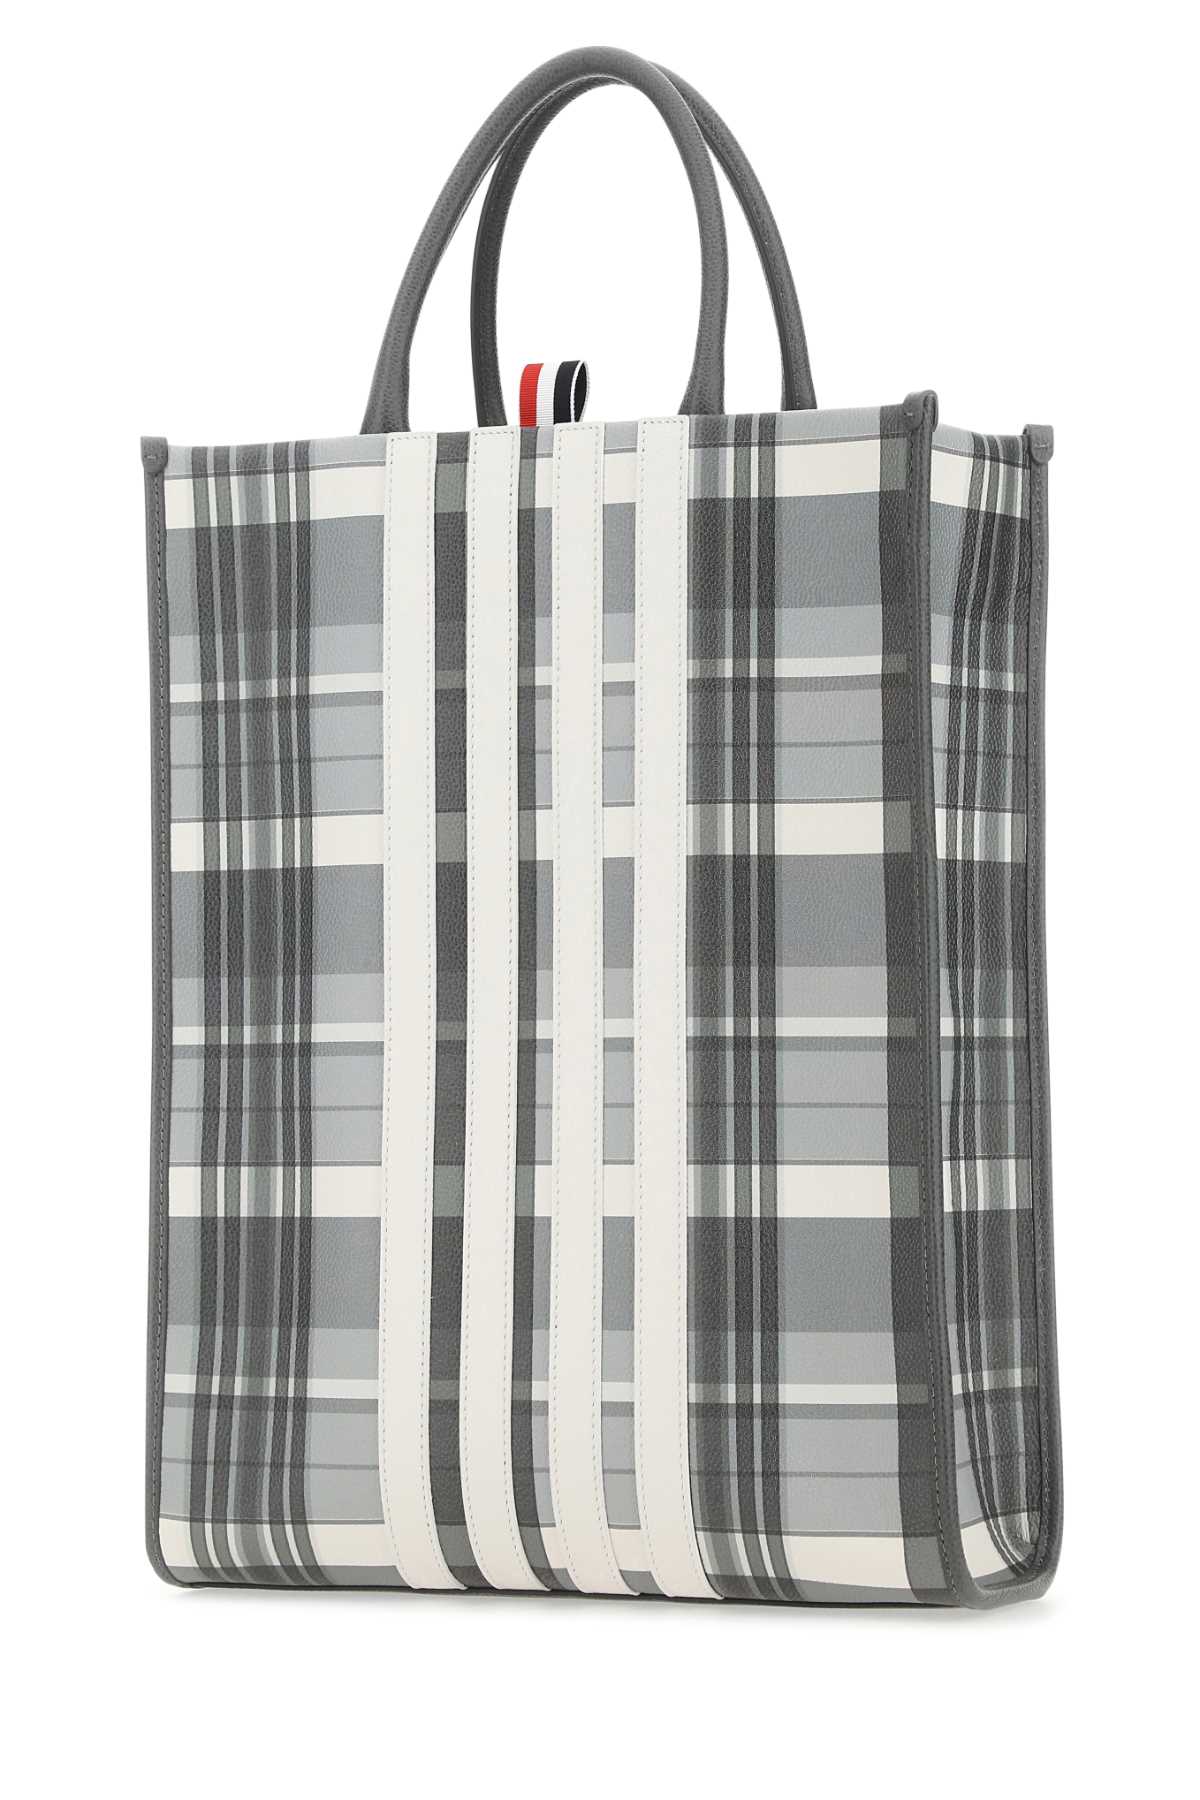 Thom Browne Printed Leather Shopping Bag In 980